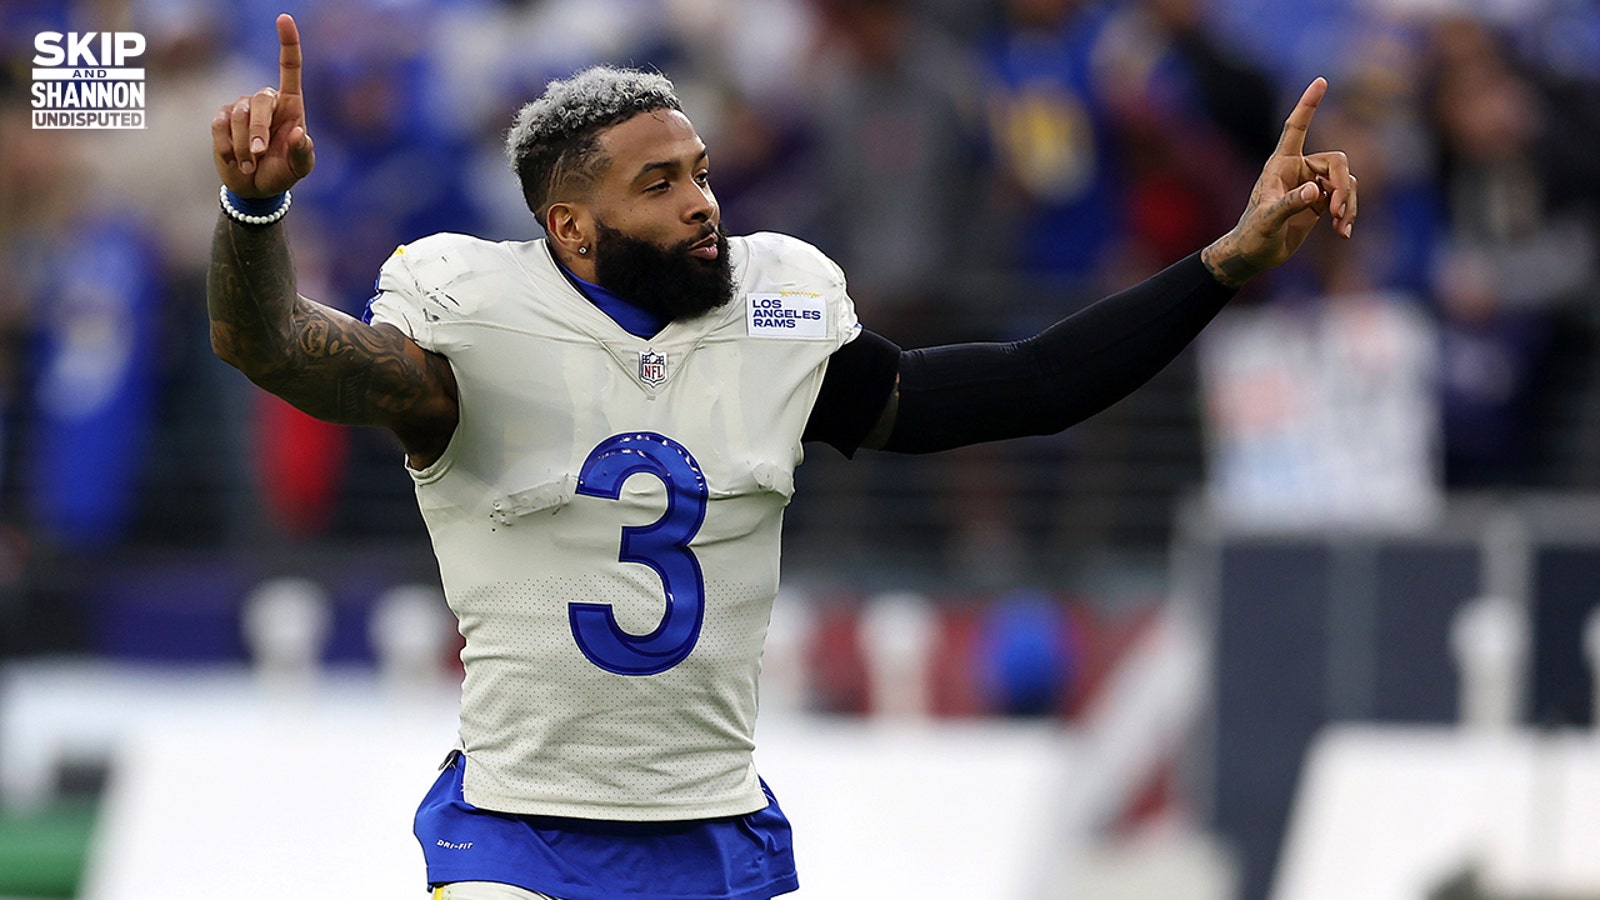 Beryl TV play-604afd926001099--Odell_logo2_1668014307783 Why the Dallas Cowboys need to sign Odell Beckham Jr. now Sports 